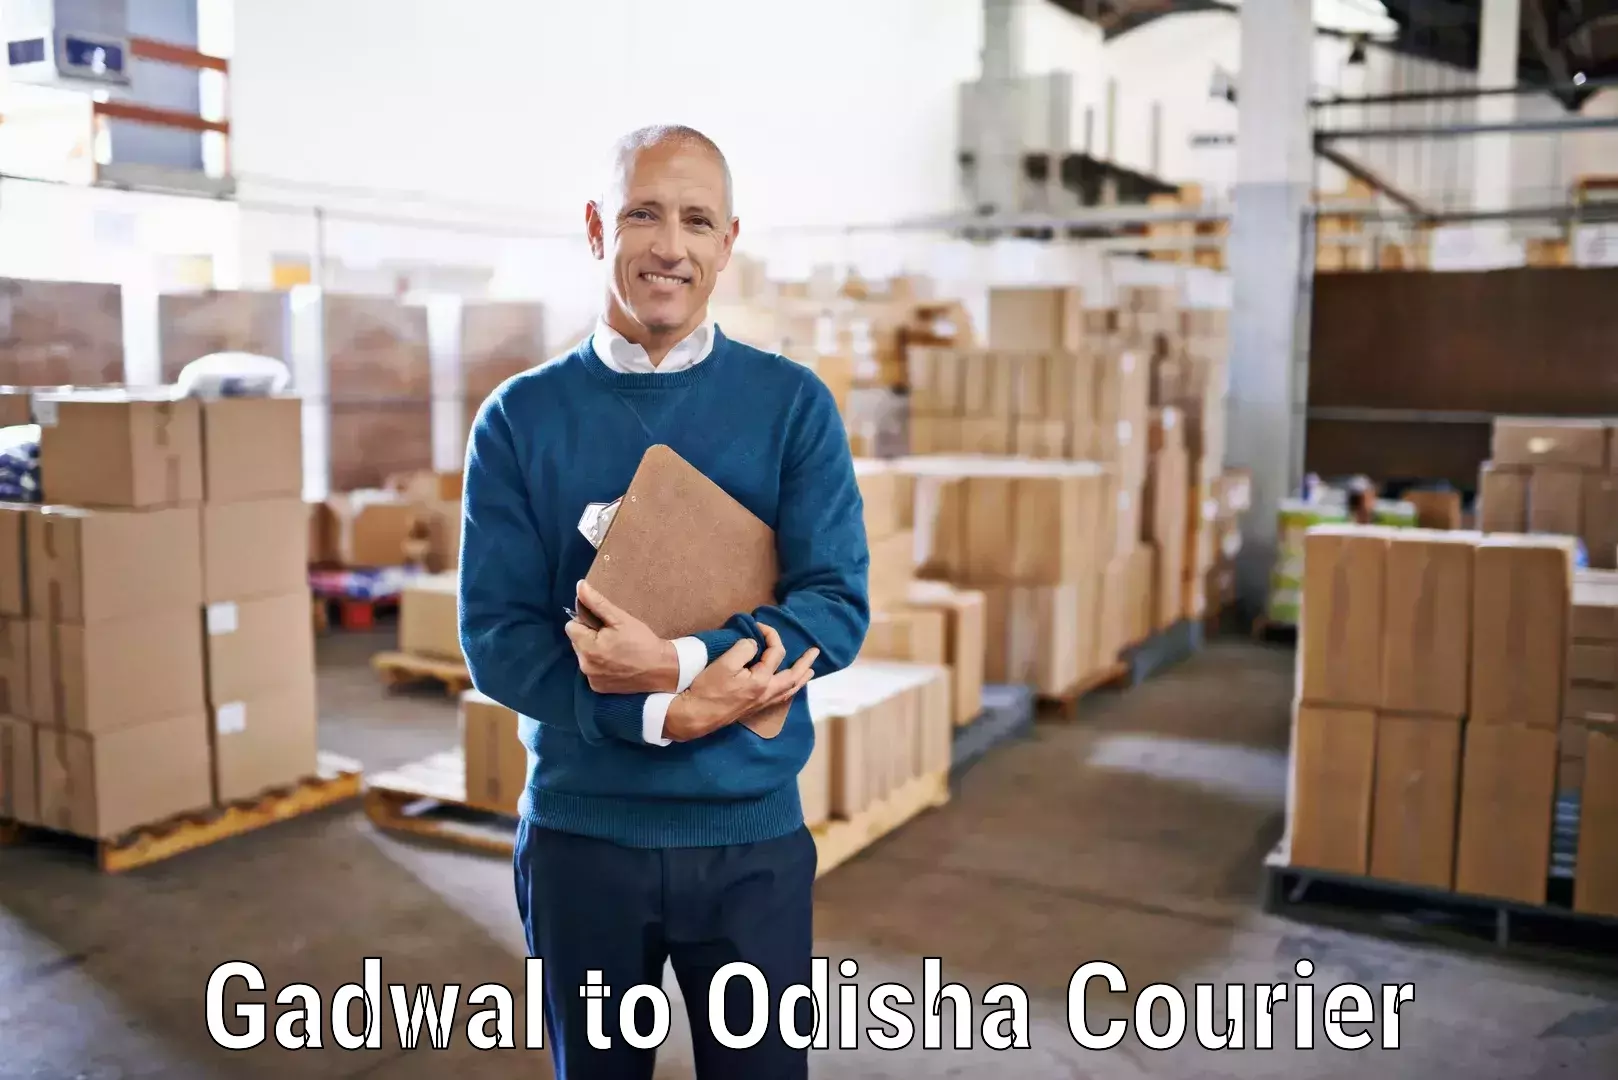 Comprehensive parcel tracking in Gadwal to Odisha